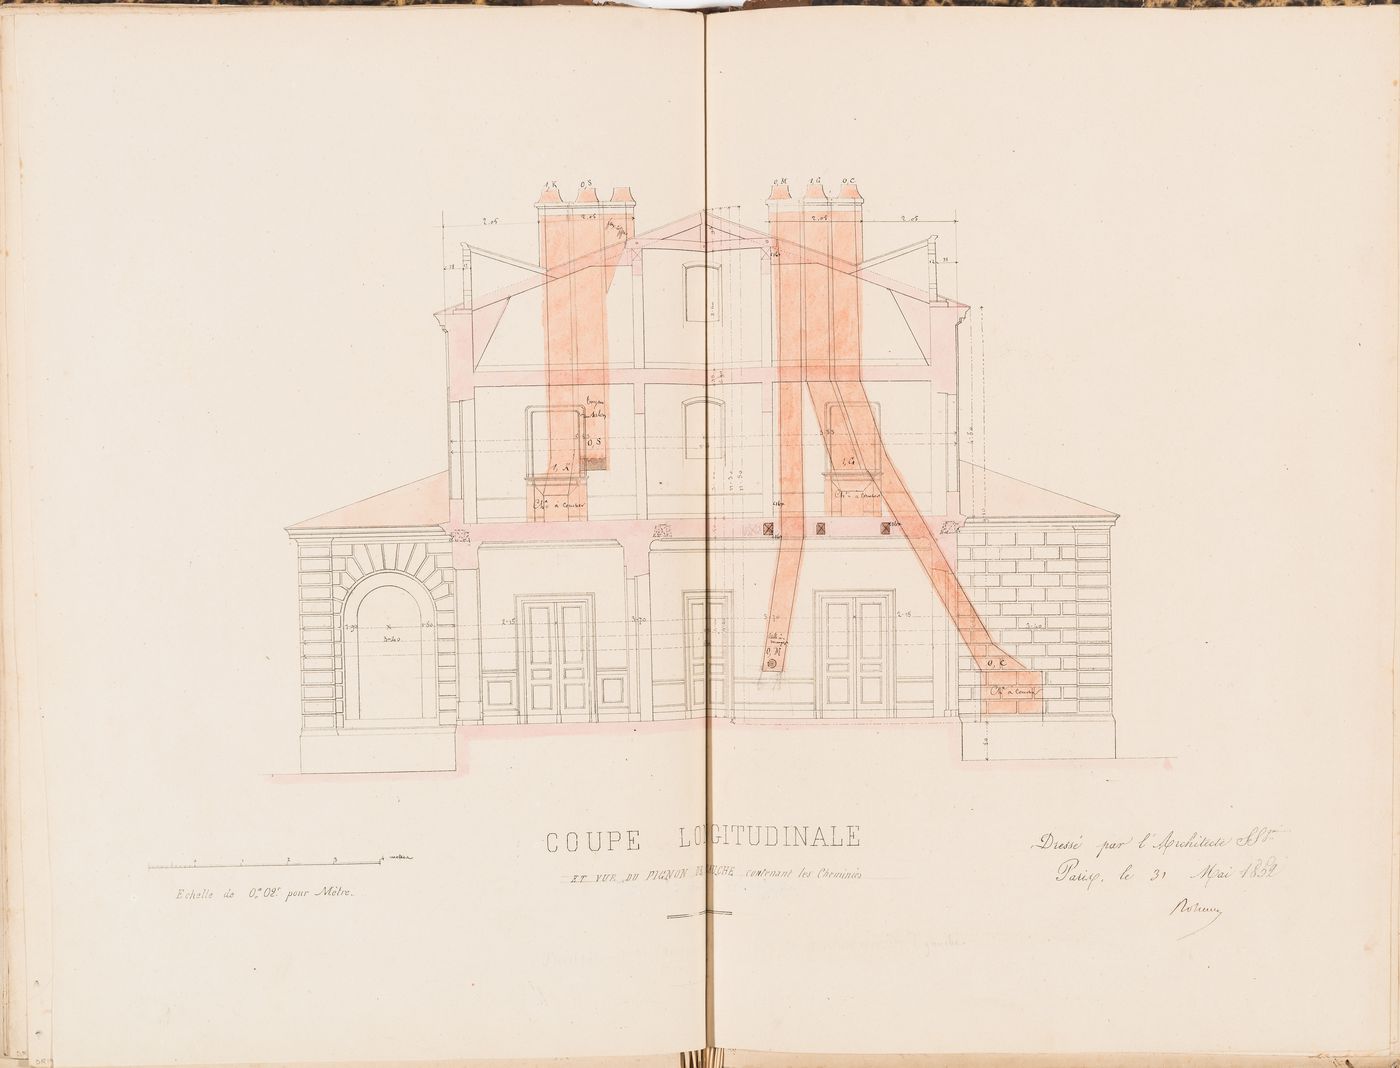 Cross section through the left gable showing the placement of the chimneys and flues for a country house for Madame de Lescure, Royan